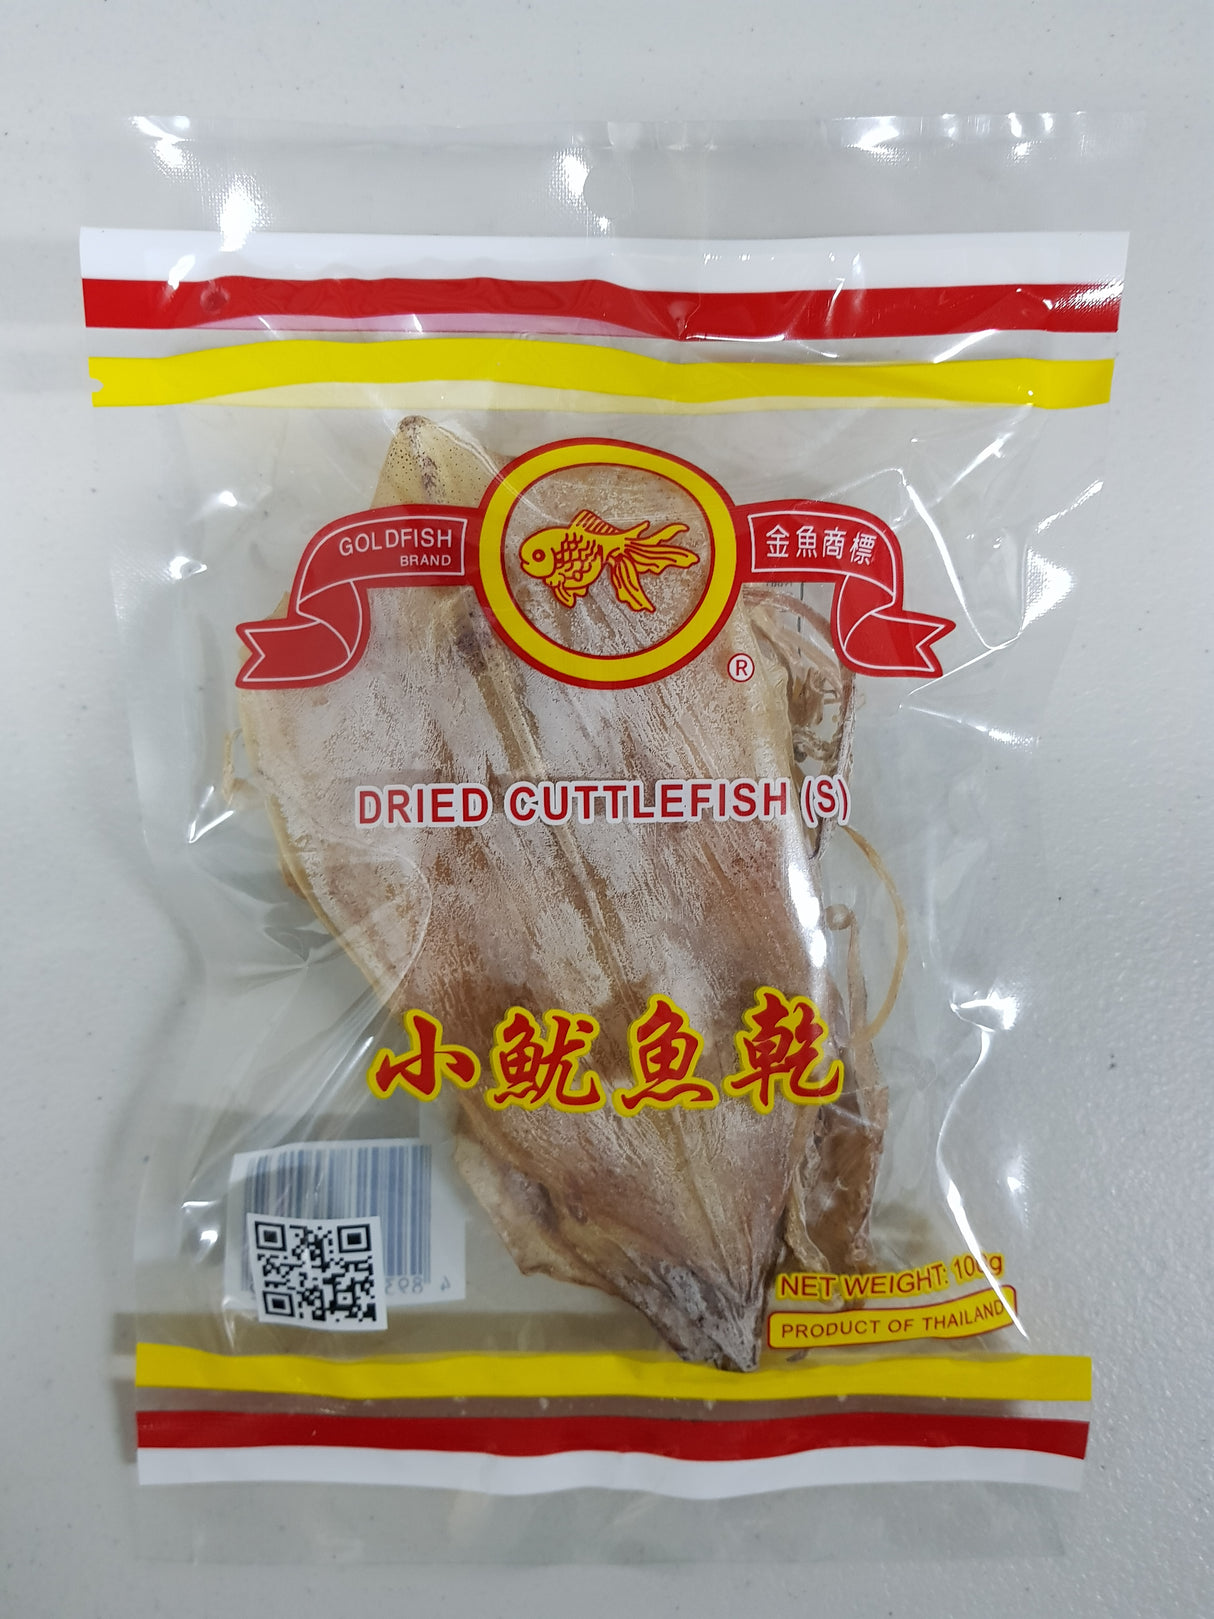 Gold Fish Dried Cuttlefish (S) 100g